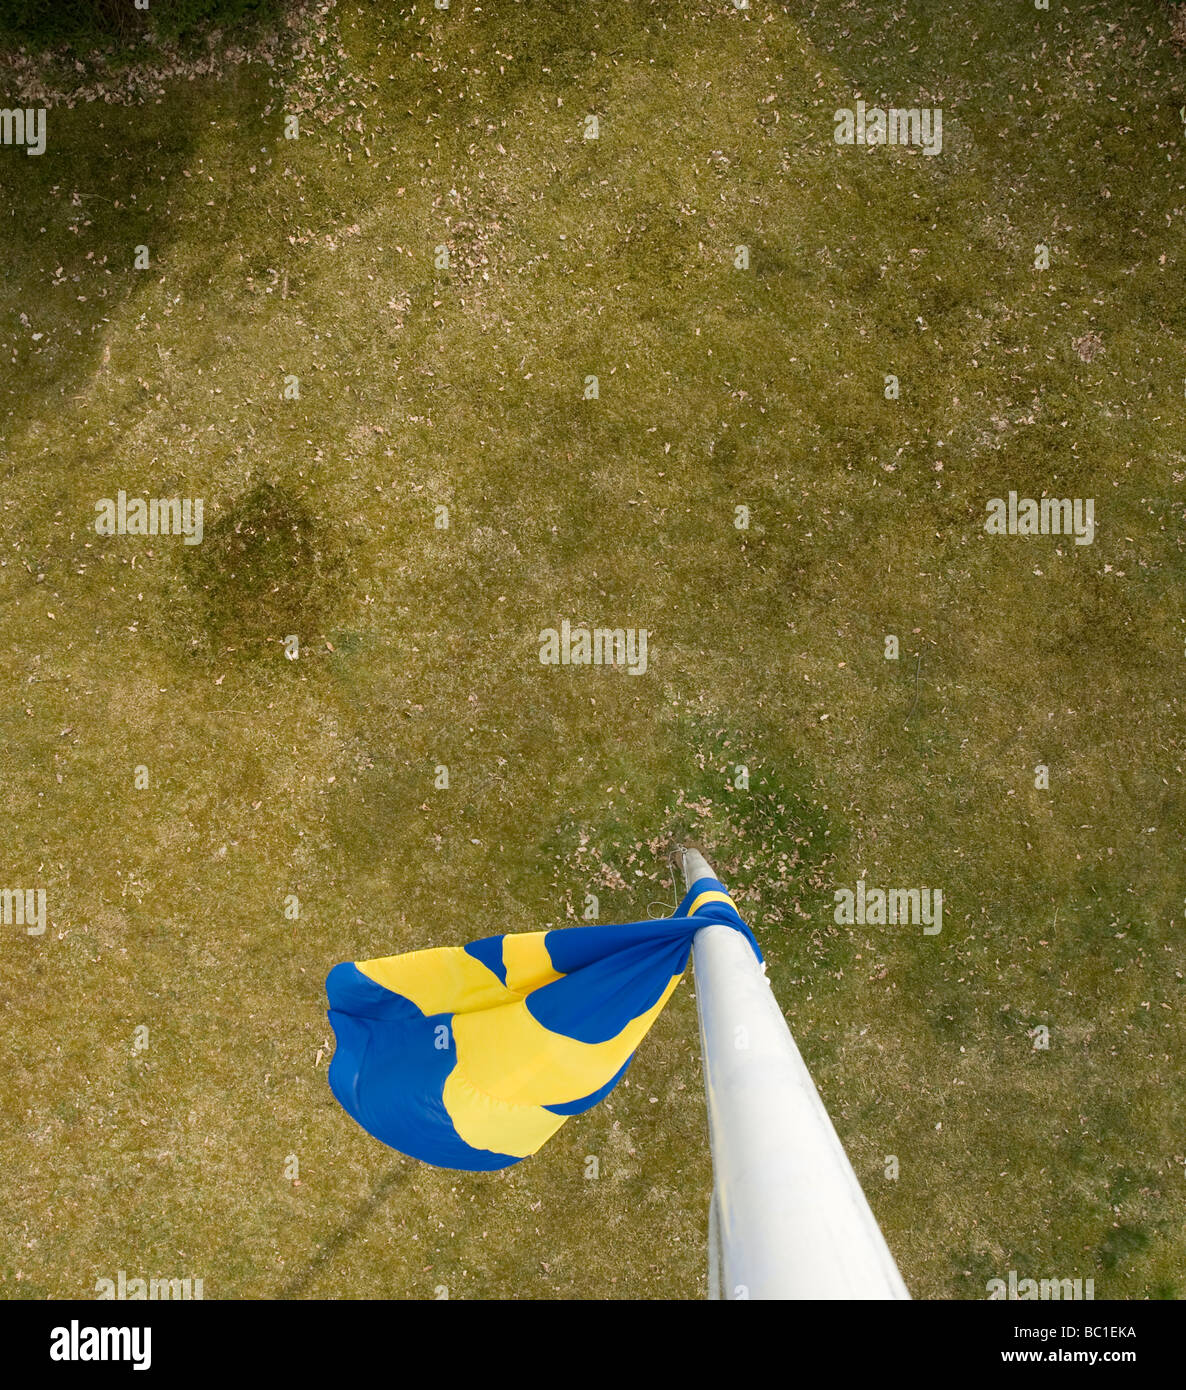 Swedish flag at half-staff, as seen from 'above view' Stock Photo